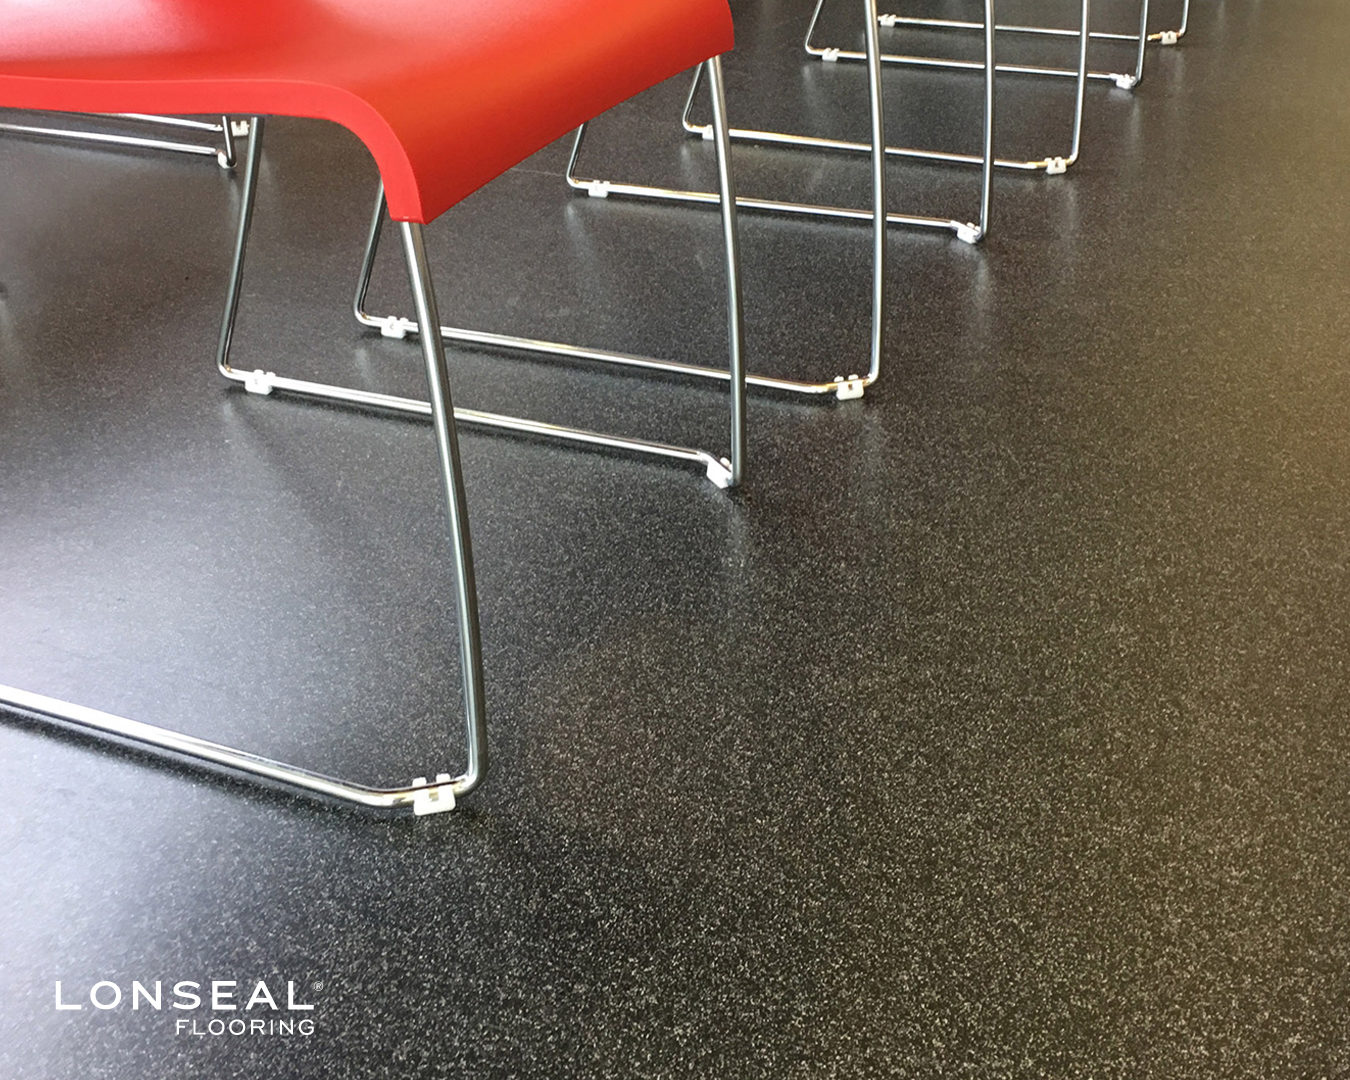 Lonseal, Sheet Vinyl Flooring, The speckled surface of LONSPECK TOPSEAL easily hides grit and scuffing, while the sanitary